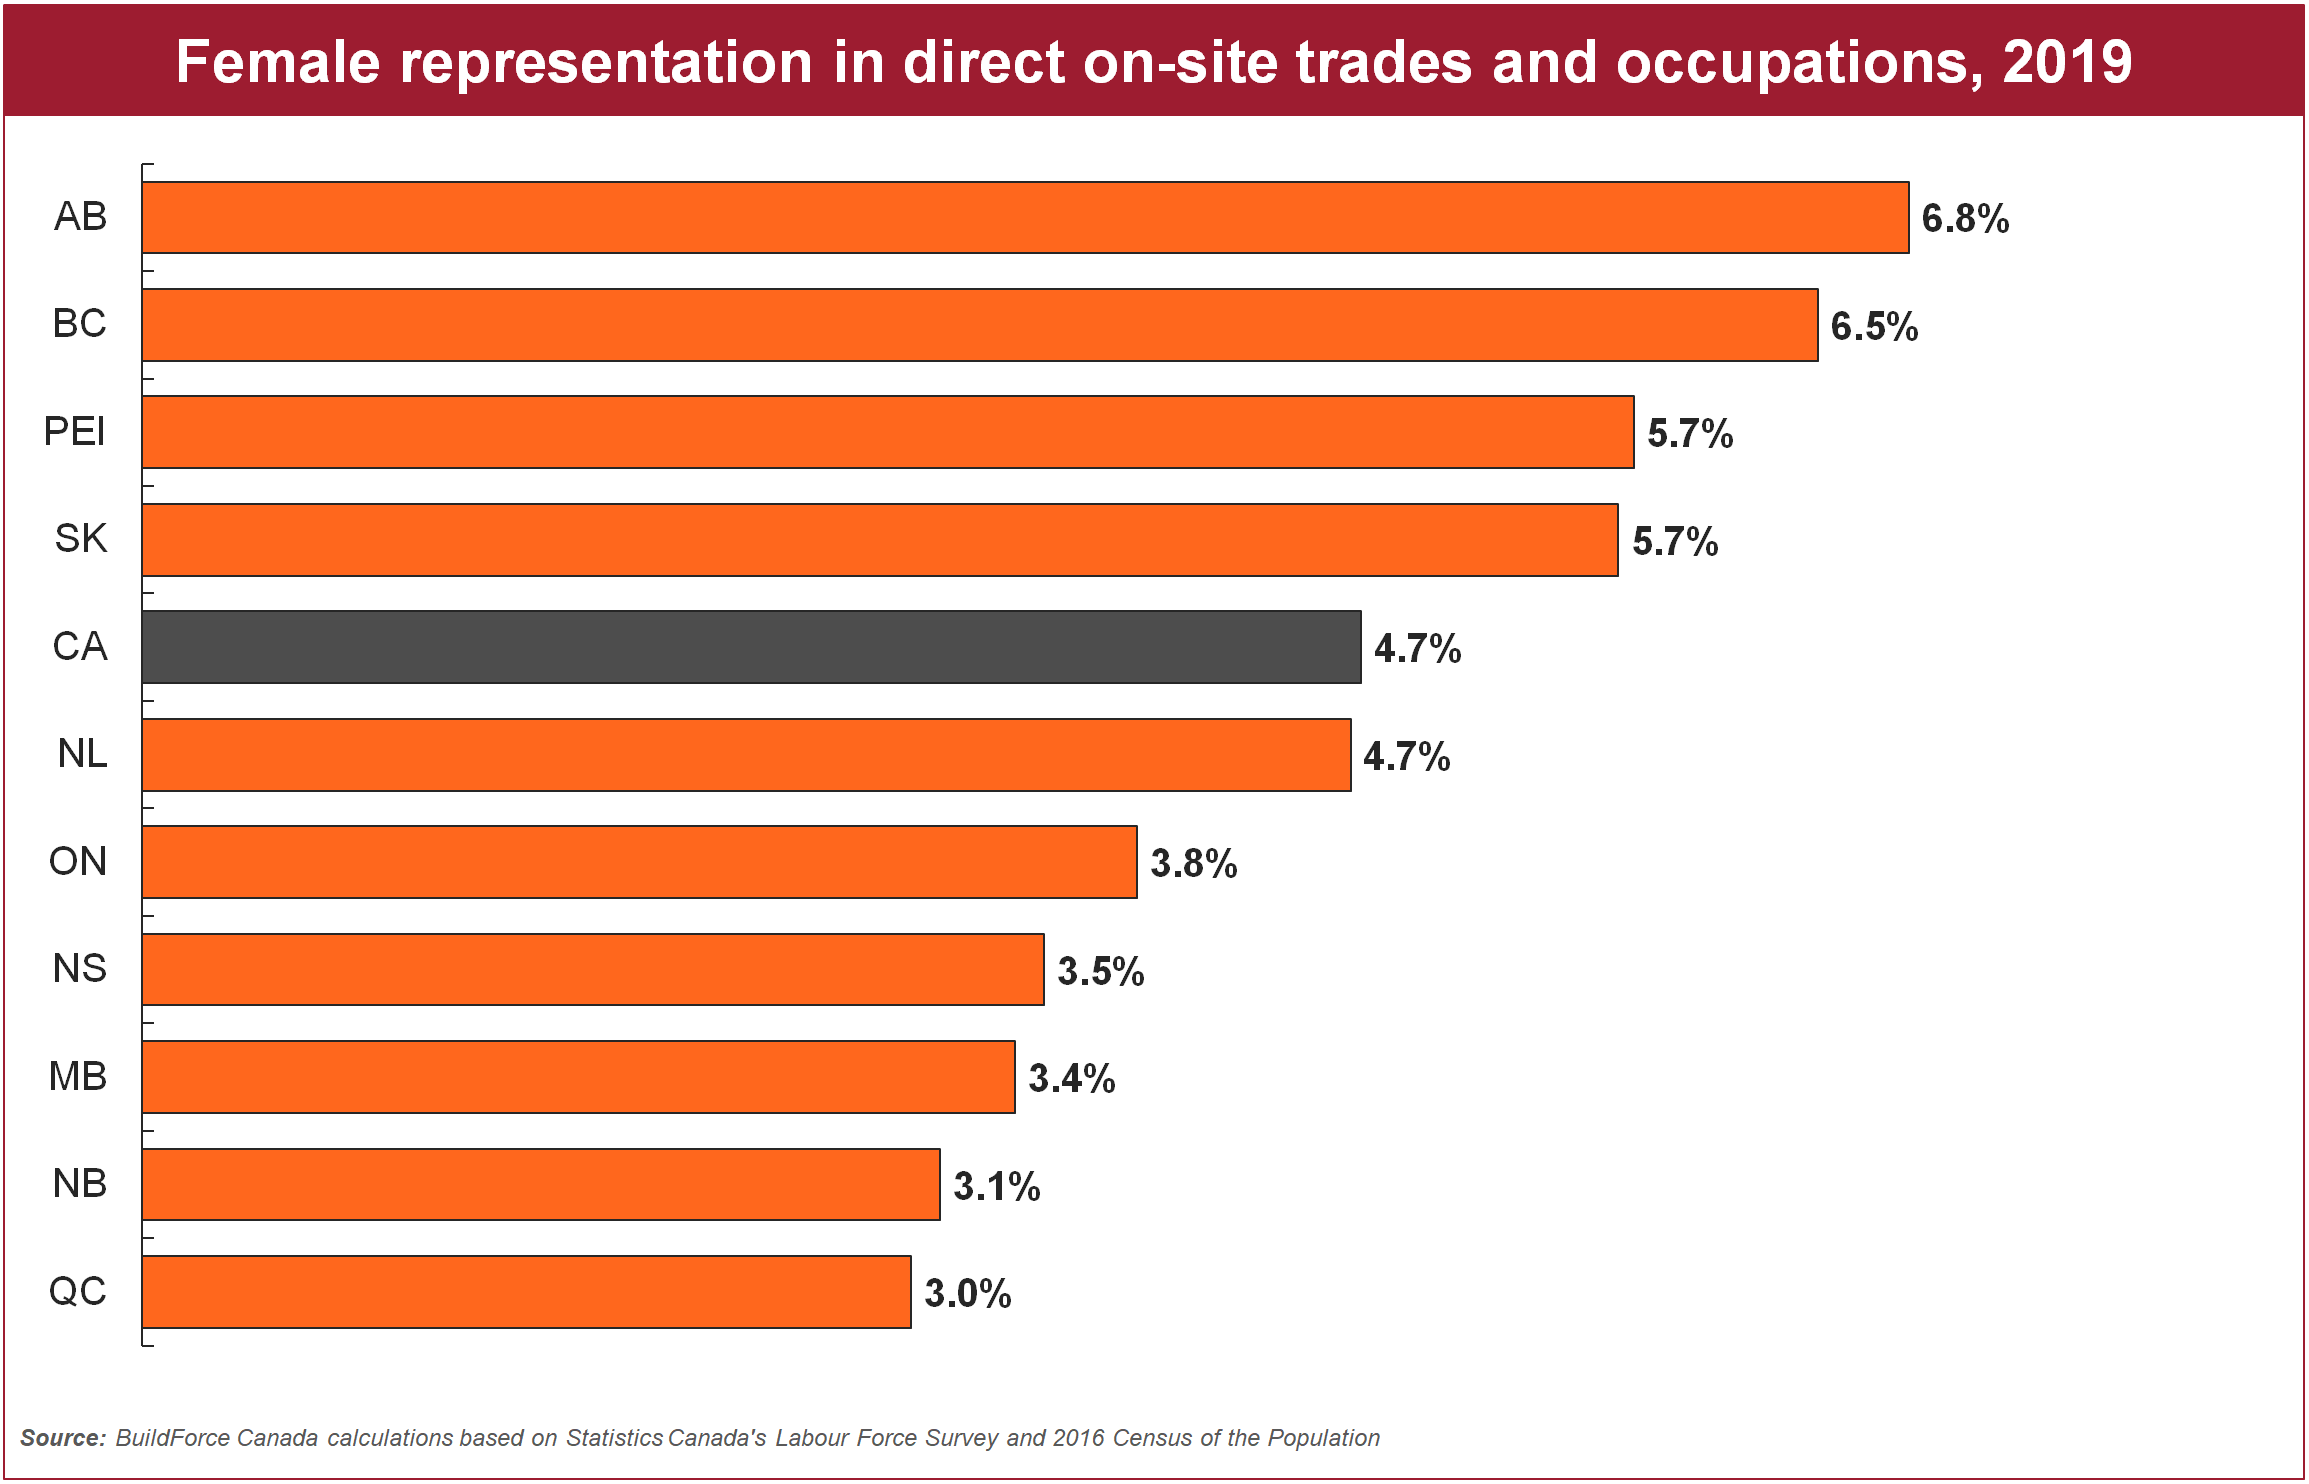 Bar graph showing Female representation in direct on-site trades and occupations in the Canadian construction industry, 2019